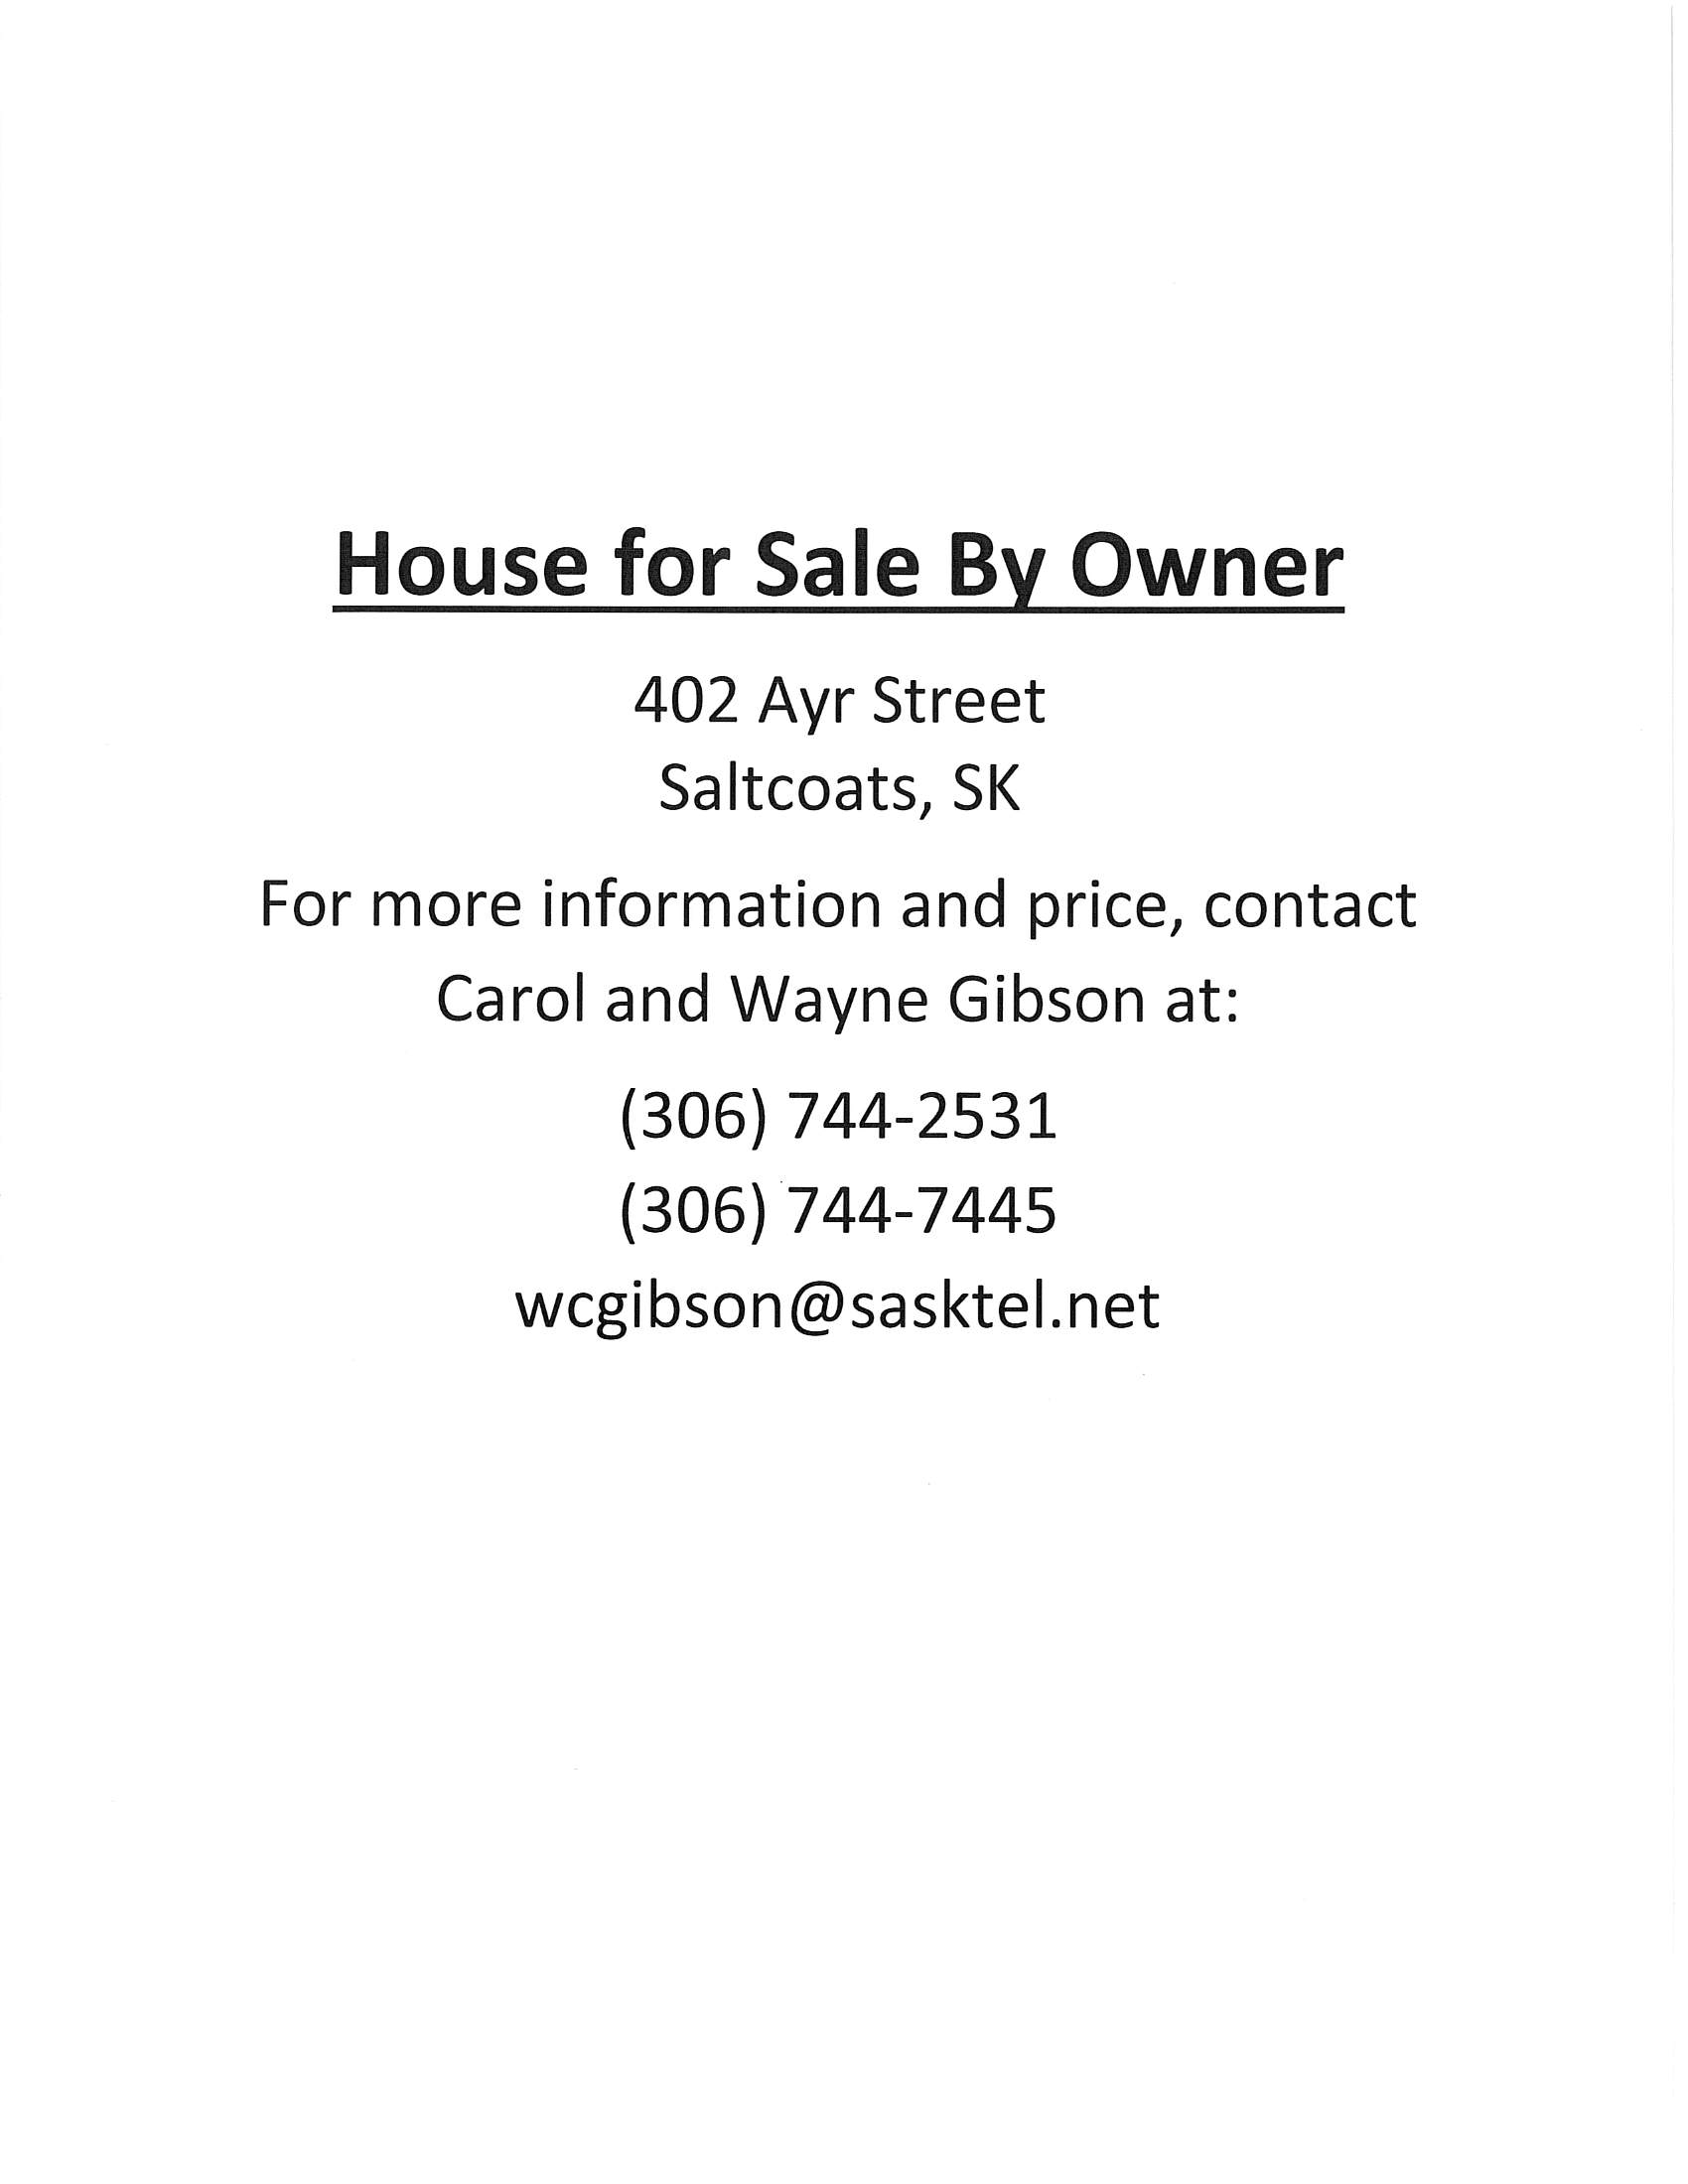 House for Sale by Owner